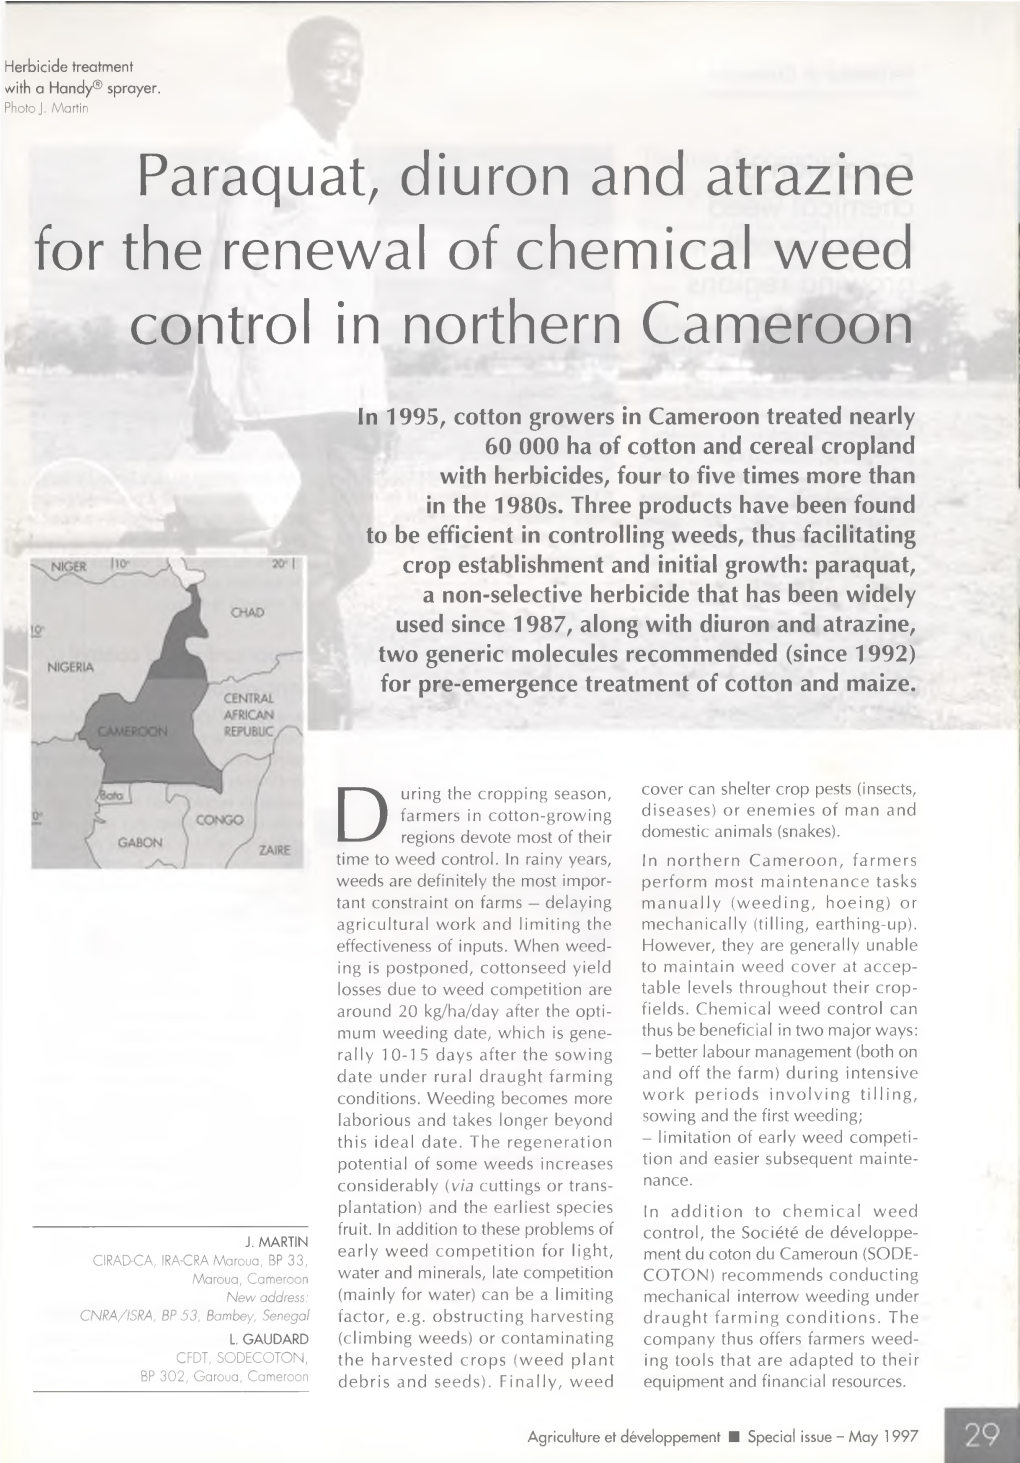 Paraquat, Diuron and Atrazine for the Renewal of Chemical Weed Control in Northern Cameroon